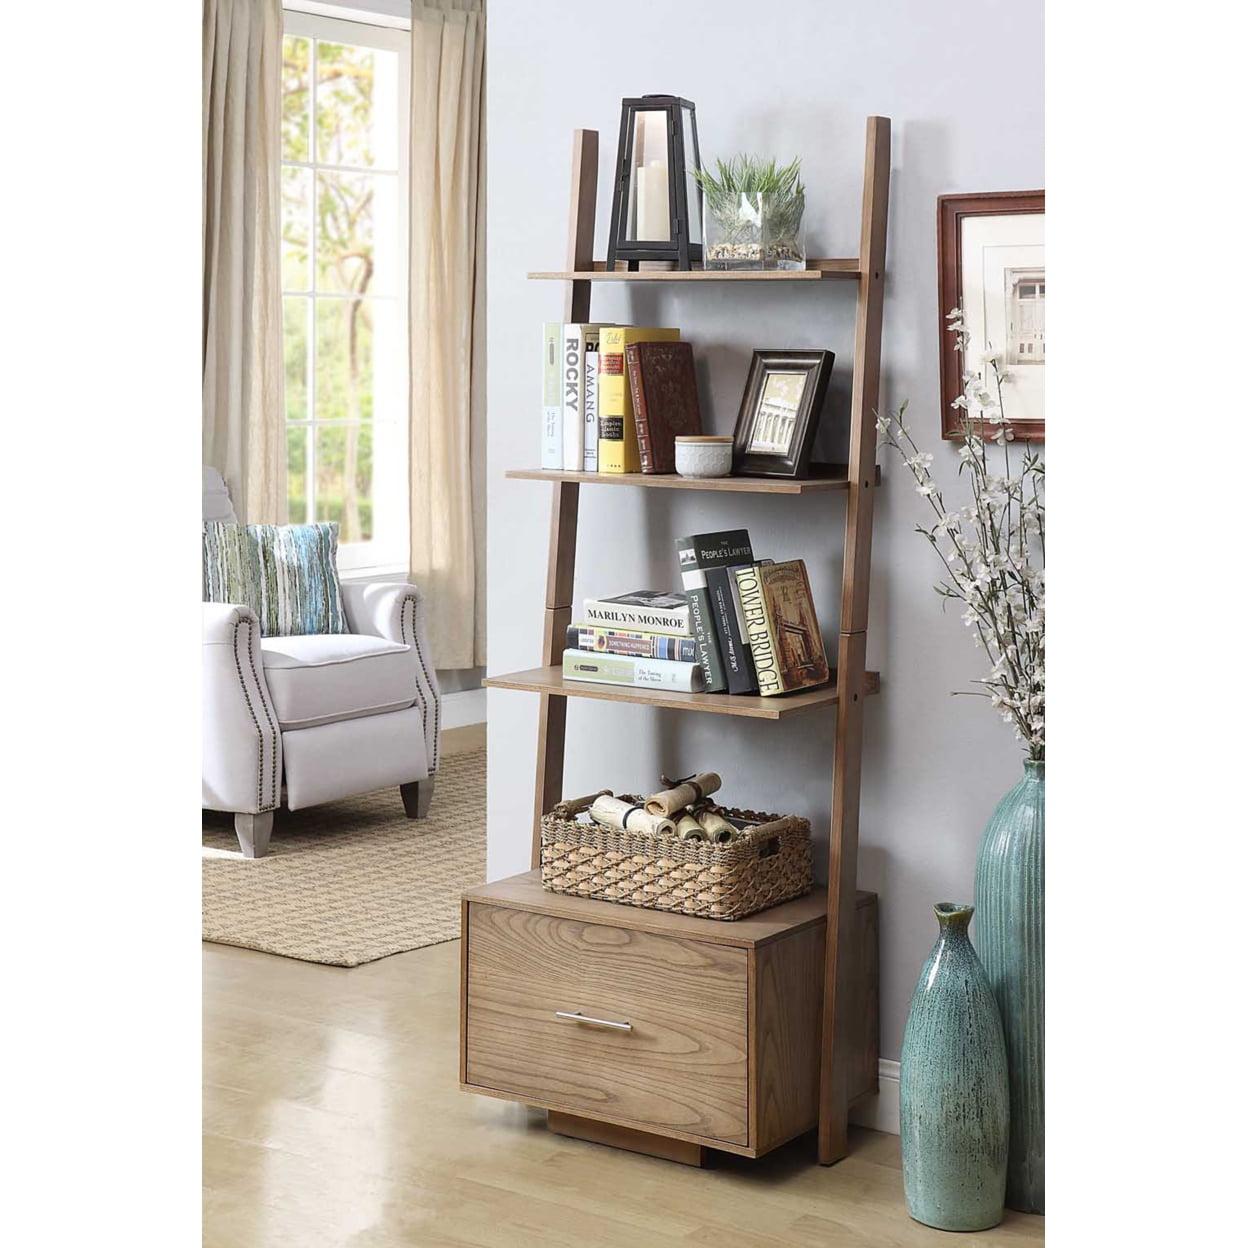 Gray Wood 4-Tier Ladder Bookcase with Concealed Storage Drawer